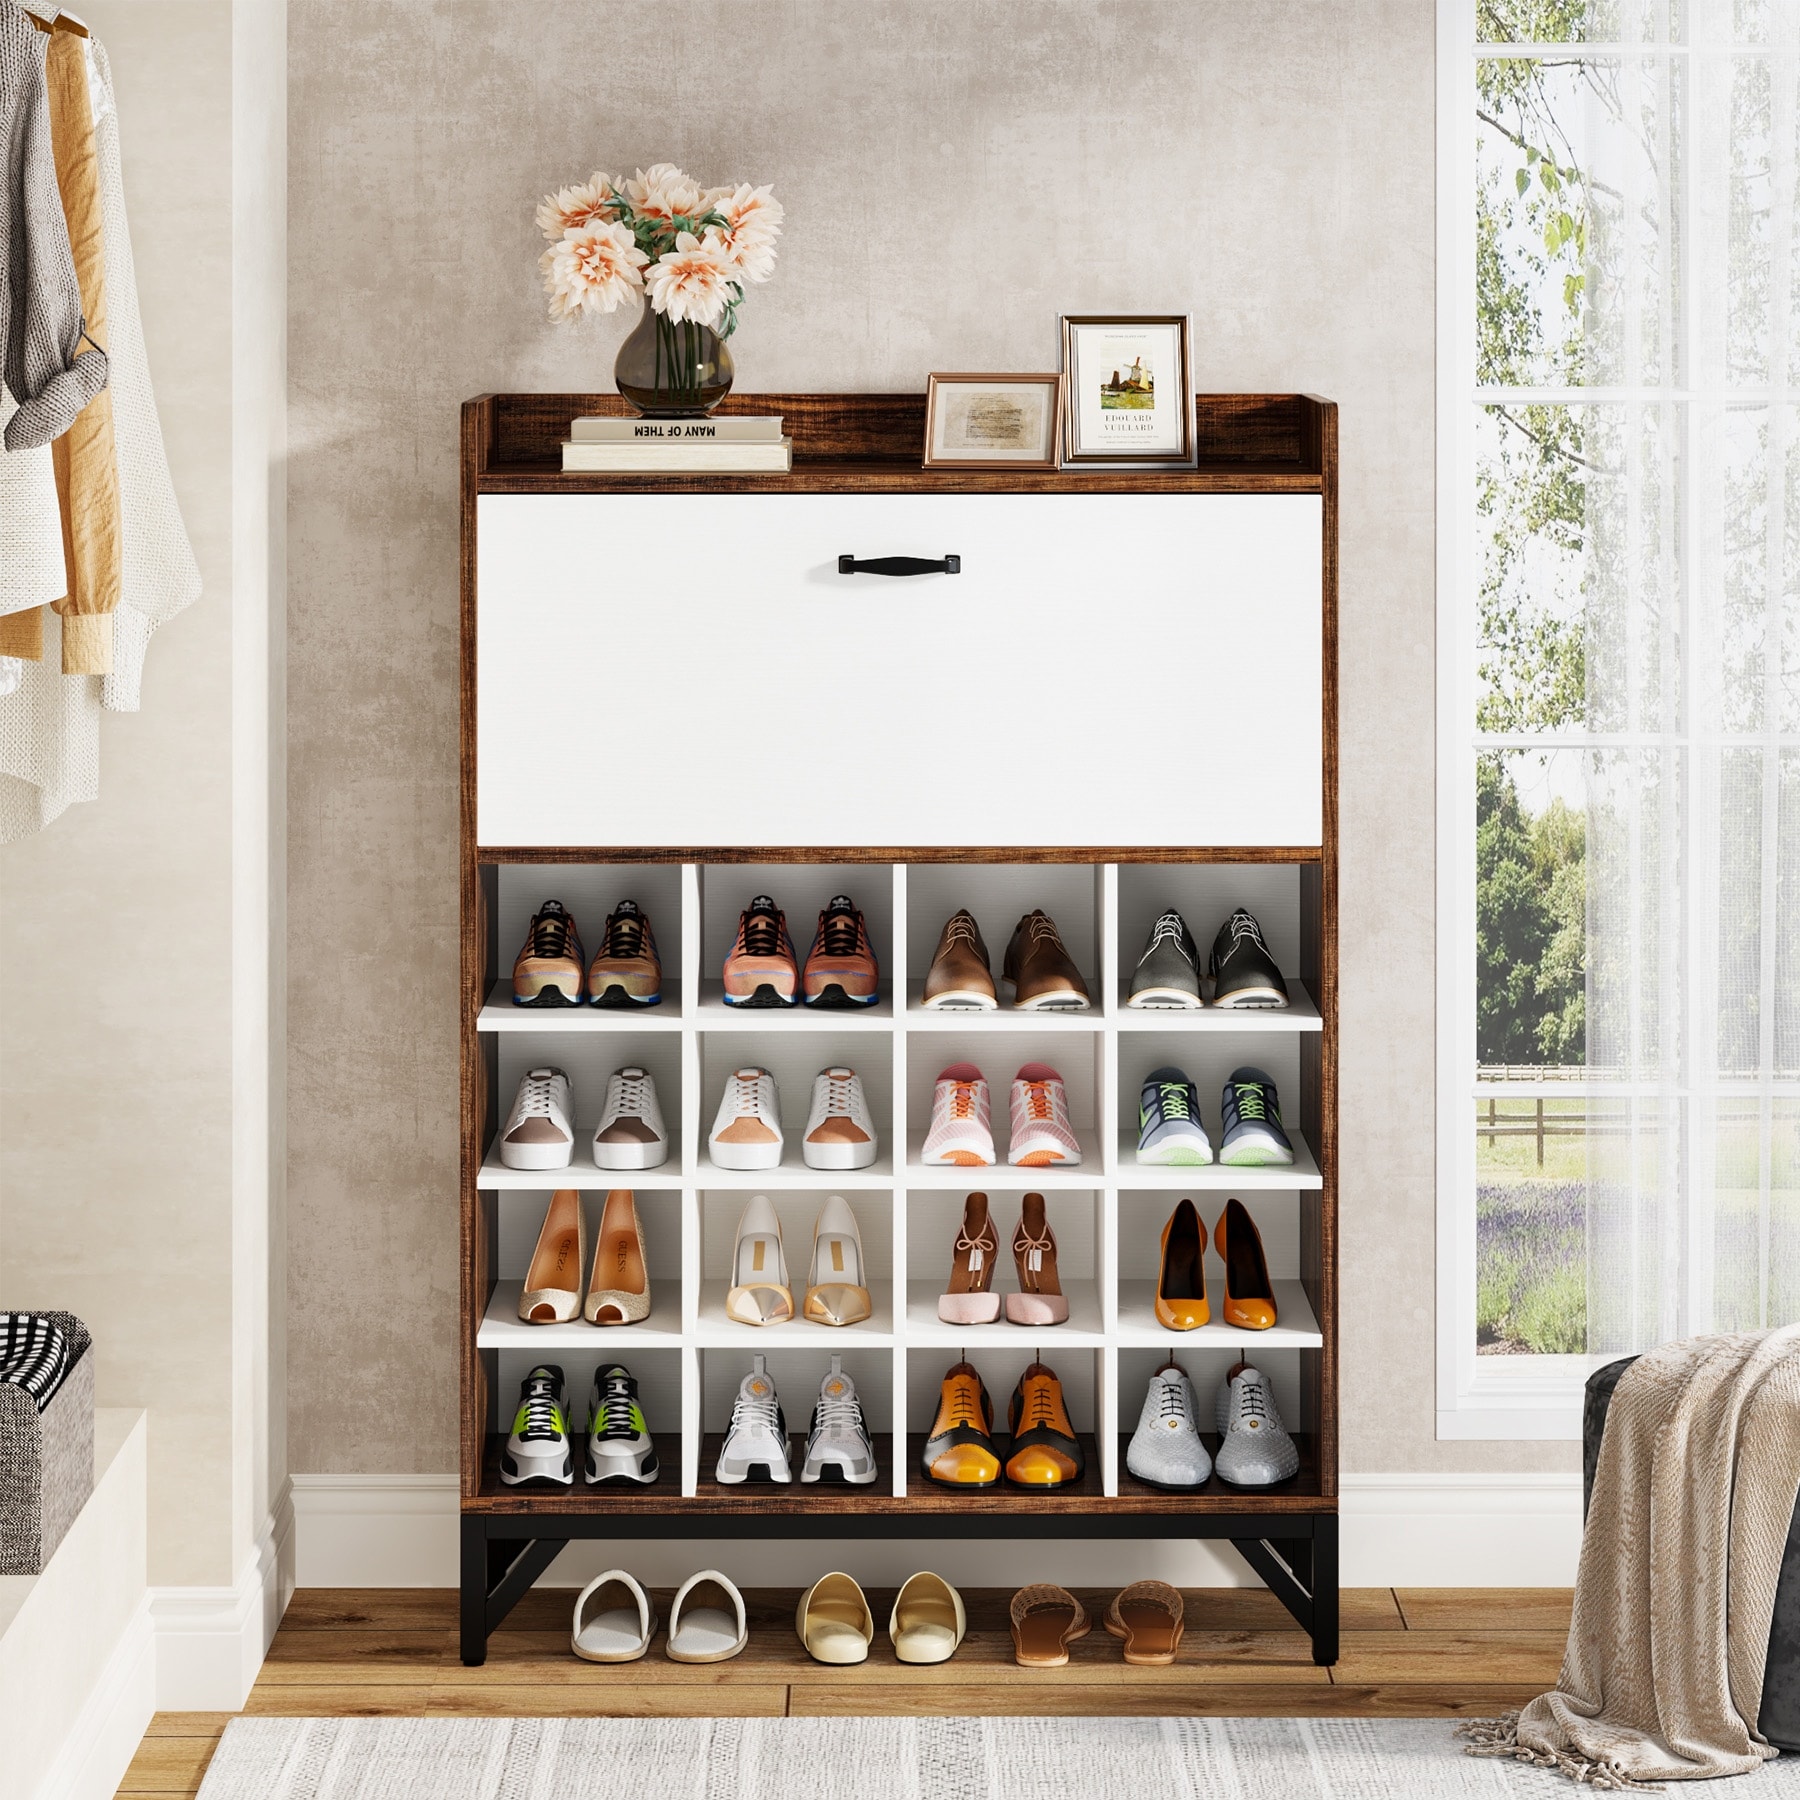 https://ak1.ostkcdn.com/images/products/is/images/direct/cb56d4f690841064212725439571729bc91848c0/Freestanding-Shoe-Storage-Cabinet-for-Entryway%2C-Wooden-Narrow-Shoe-Rack-Organizer.jpg